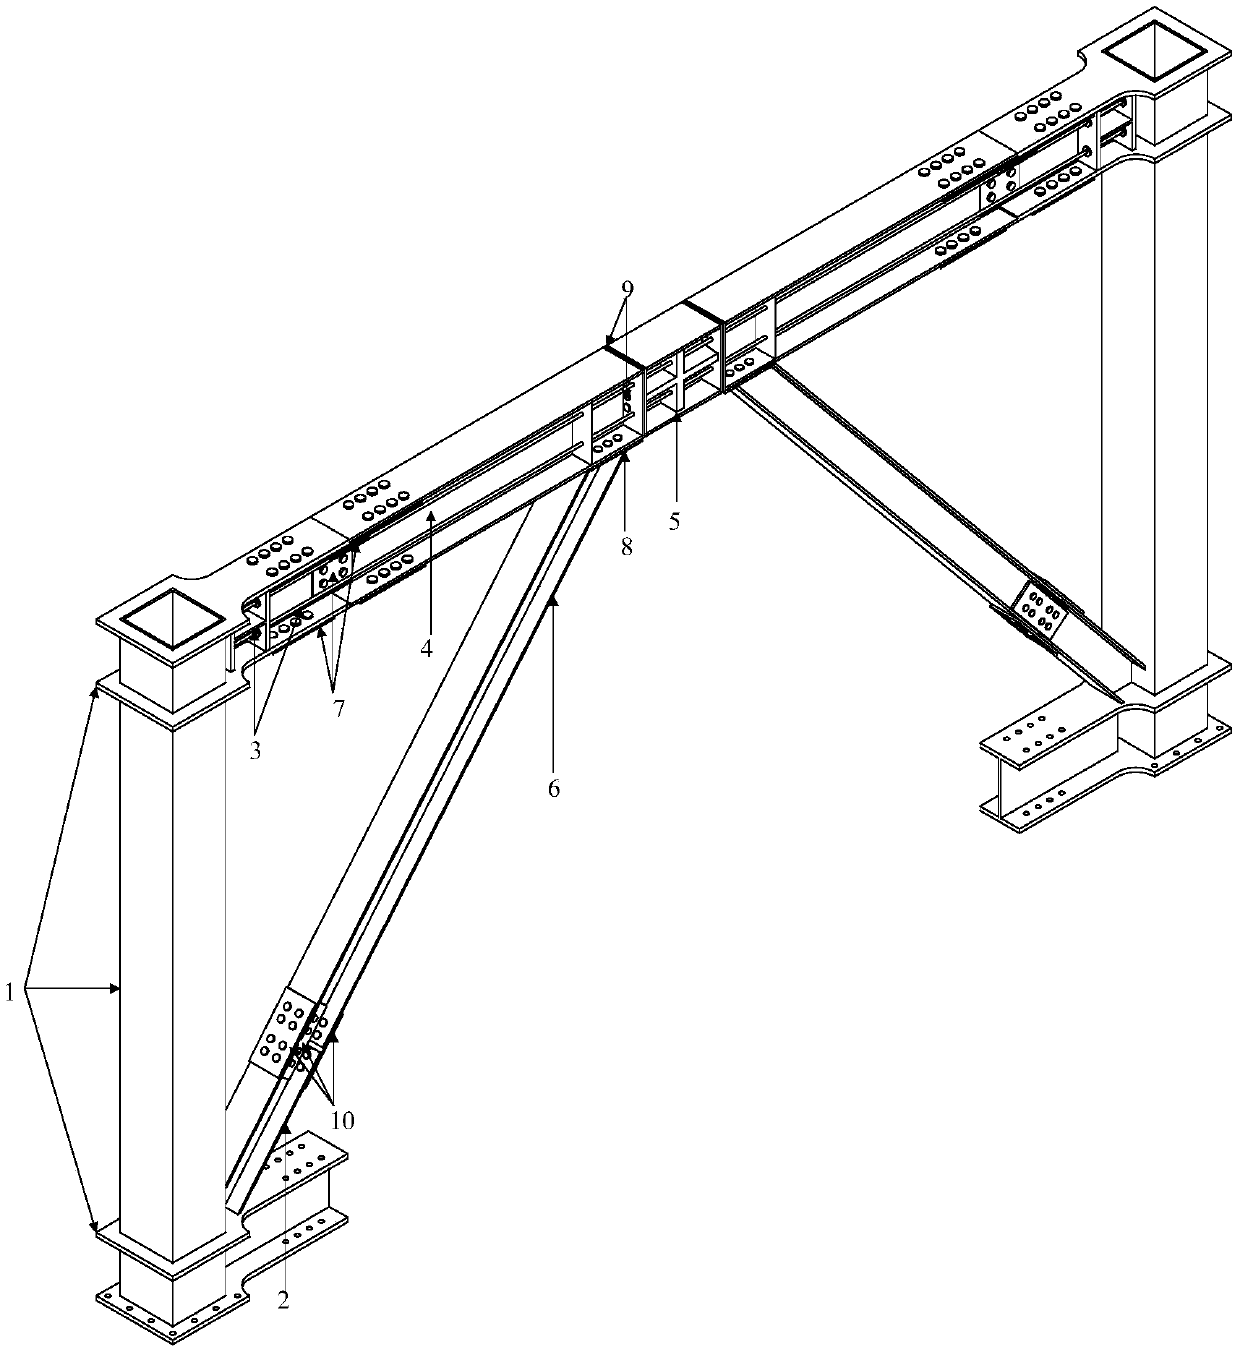 Self-resetting steel frame eccentric support system